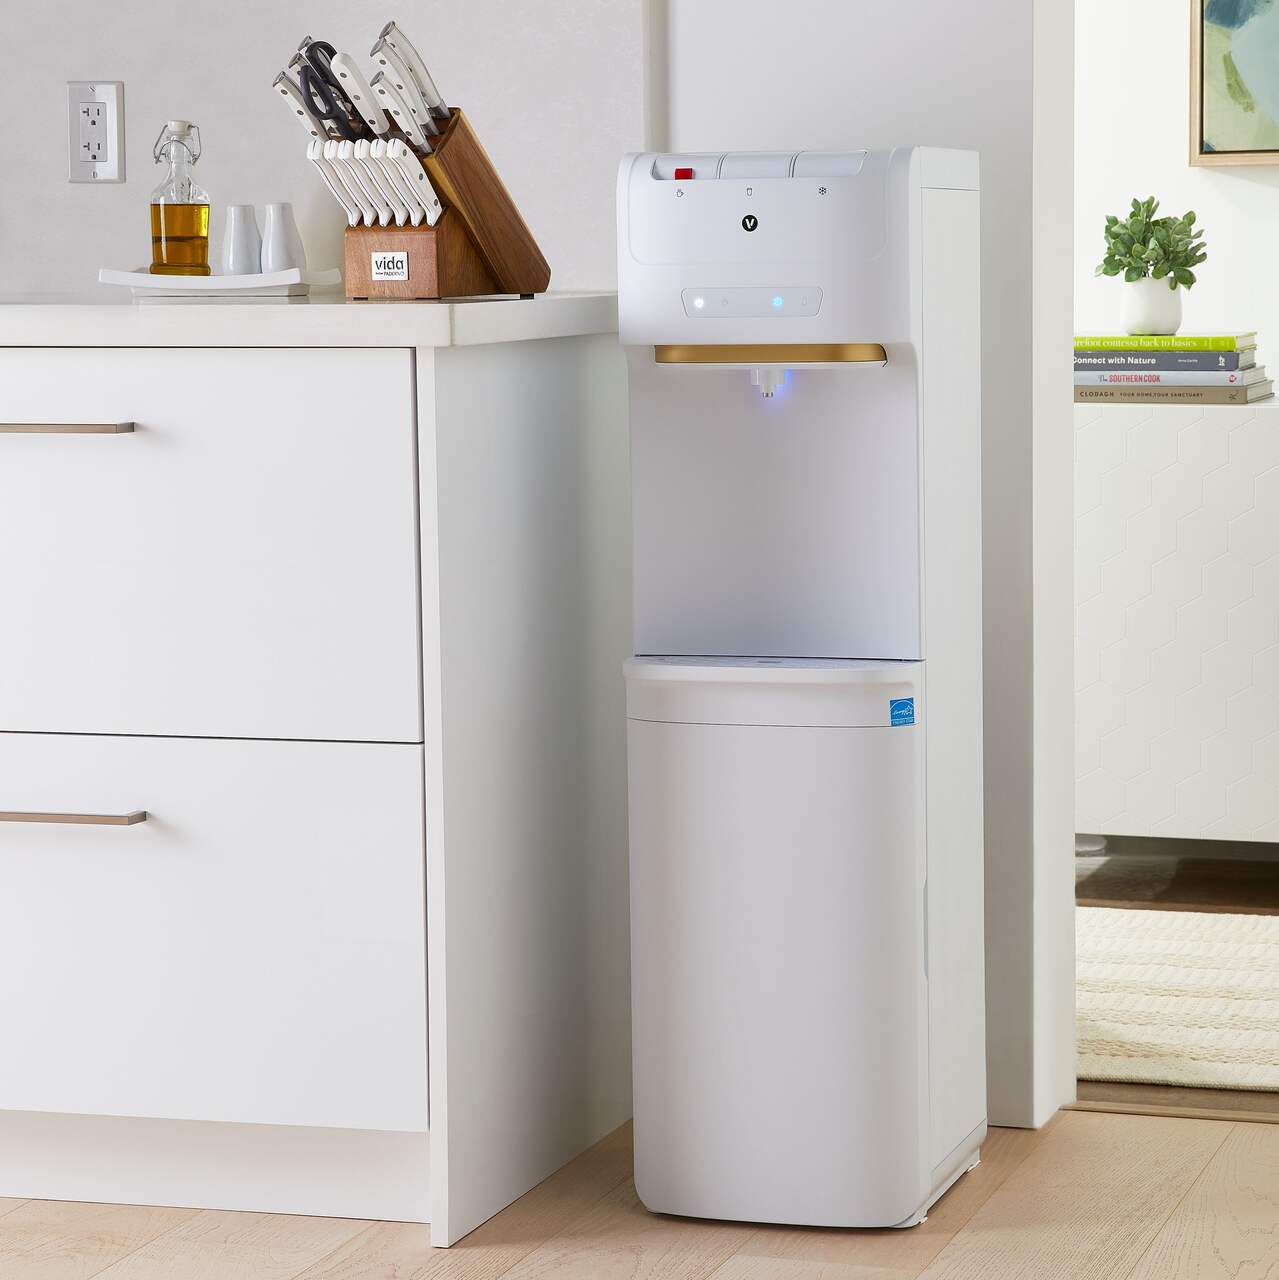 https://media-www.canadiantire.ca/product/living/kitchen/white-goods/0437071/vida-white-bottom-load-water-cooler-f0676e5c-005c-40bf-8ce4-65ce35dd45aa-jpgrendition.jpg?imdensity=1&imwidth=1244&impolicy=mZoom